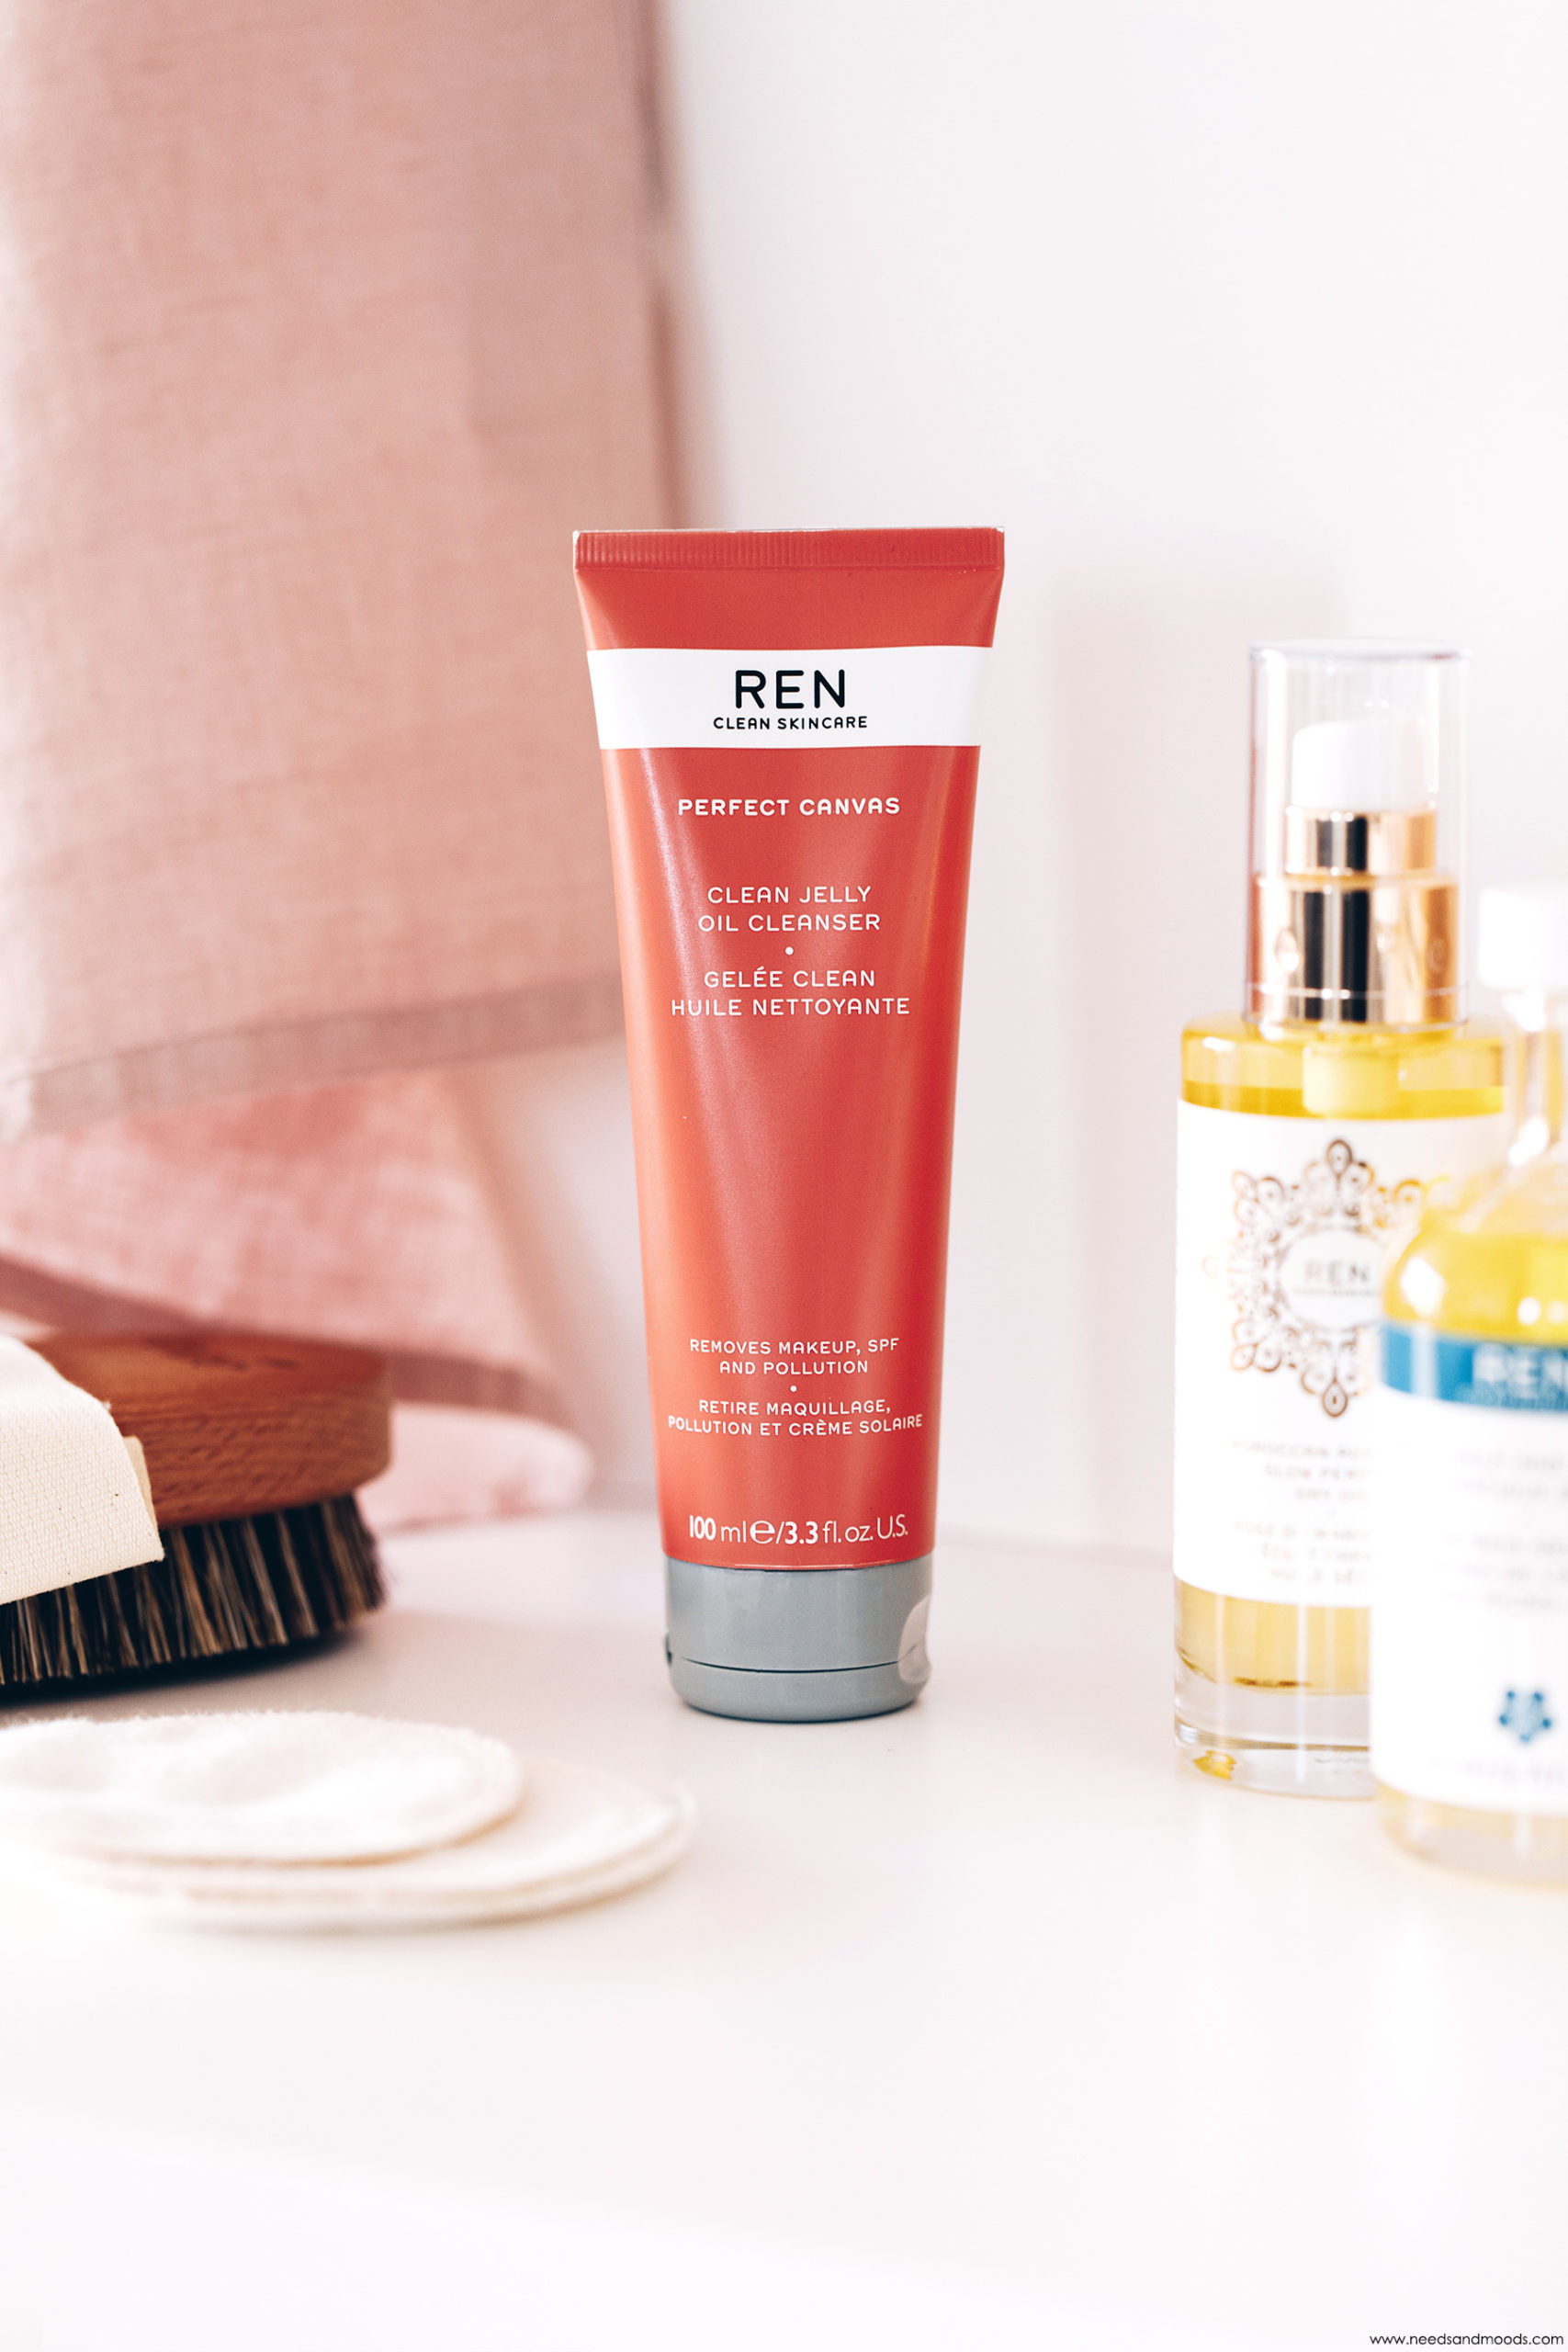 ren skincare perfect canvas clean jelly oil cleanser